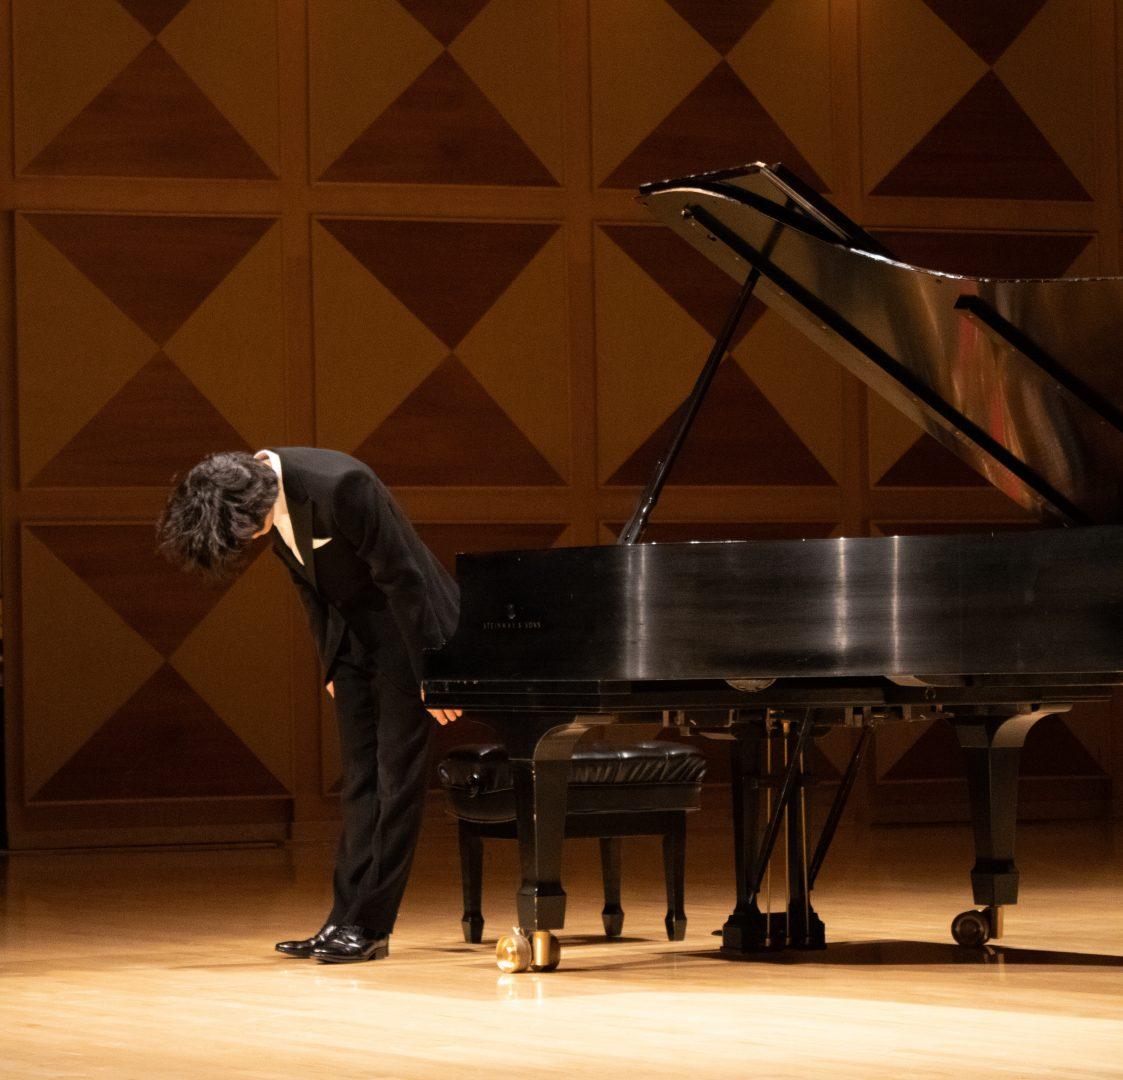 Yunchan Lim, a famous South Korean pianist, played at the Paul Shaghoian Memorial Concert Hall on Oct. 14. (Diego Vargas/The Collegian)